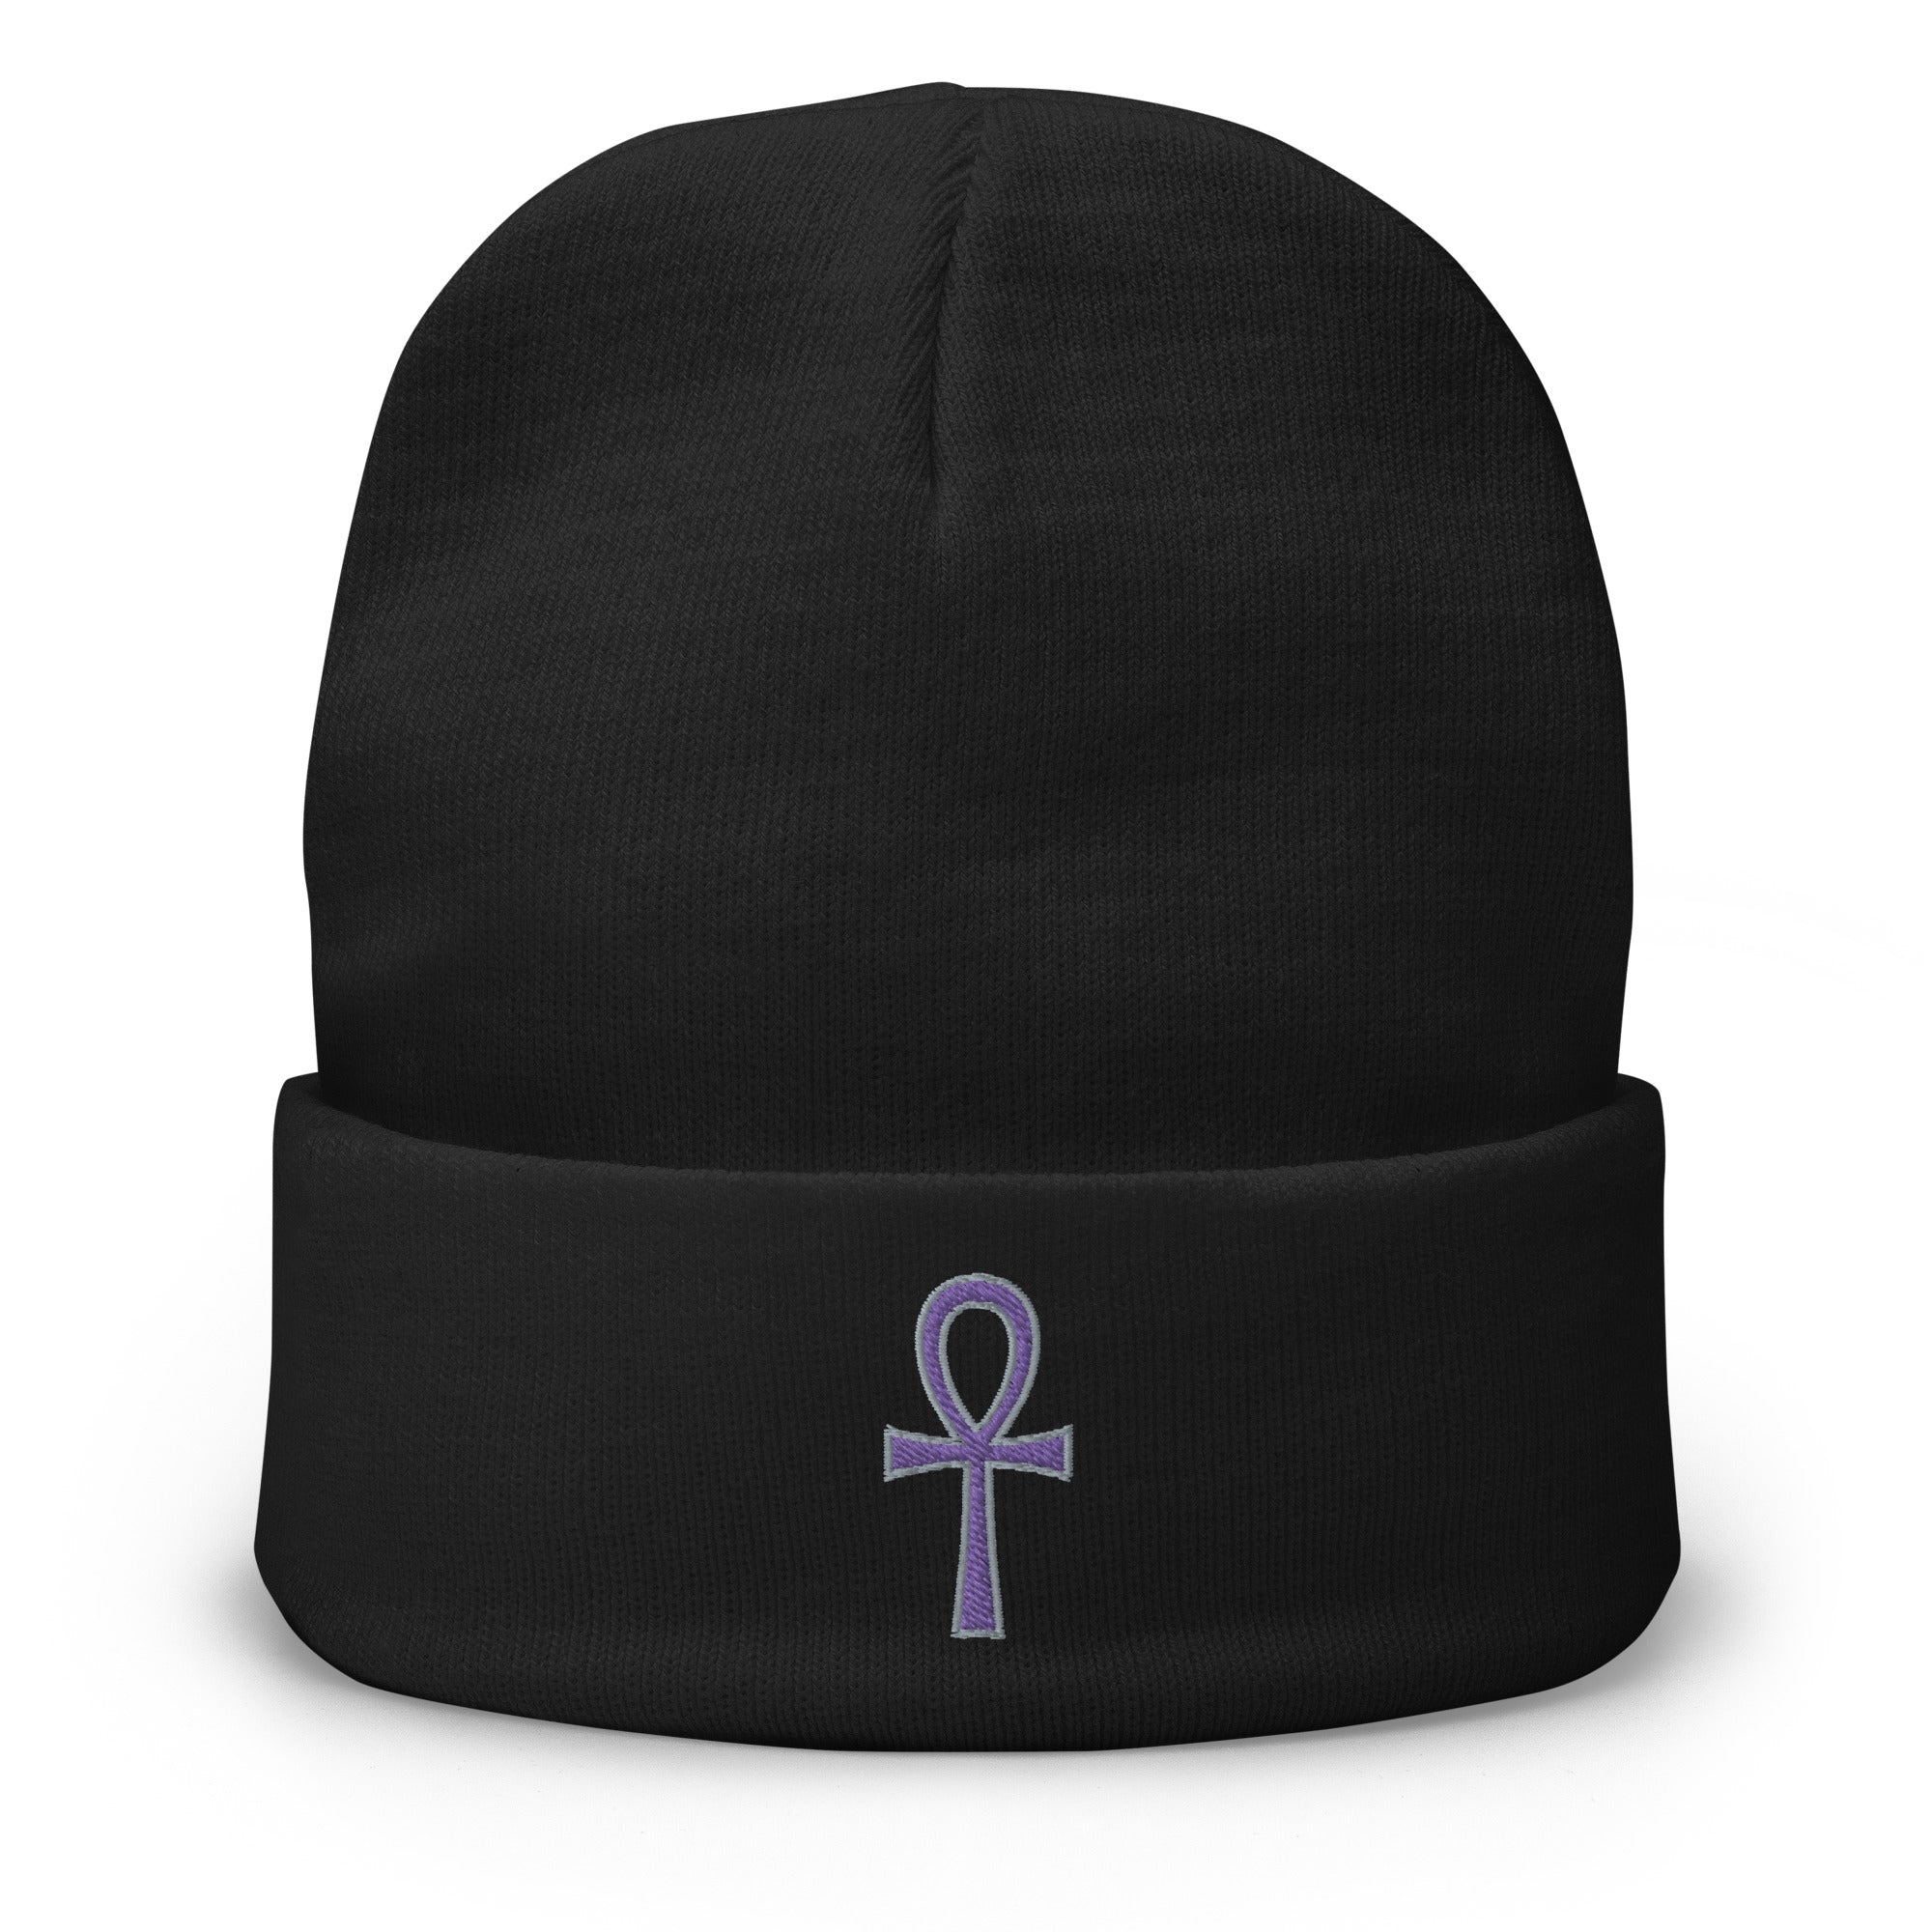 The Key of Life Ankh Ancient Egyptian Culture Embroidered Cuff Beanie Purple Thread - Edge of Life Designs